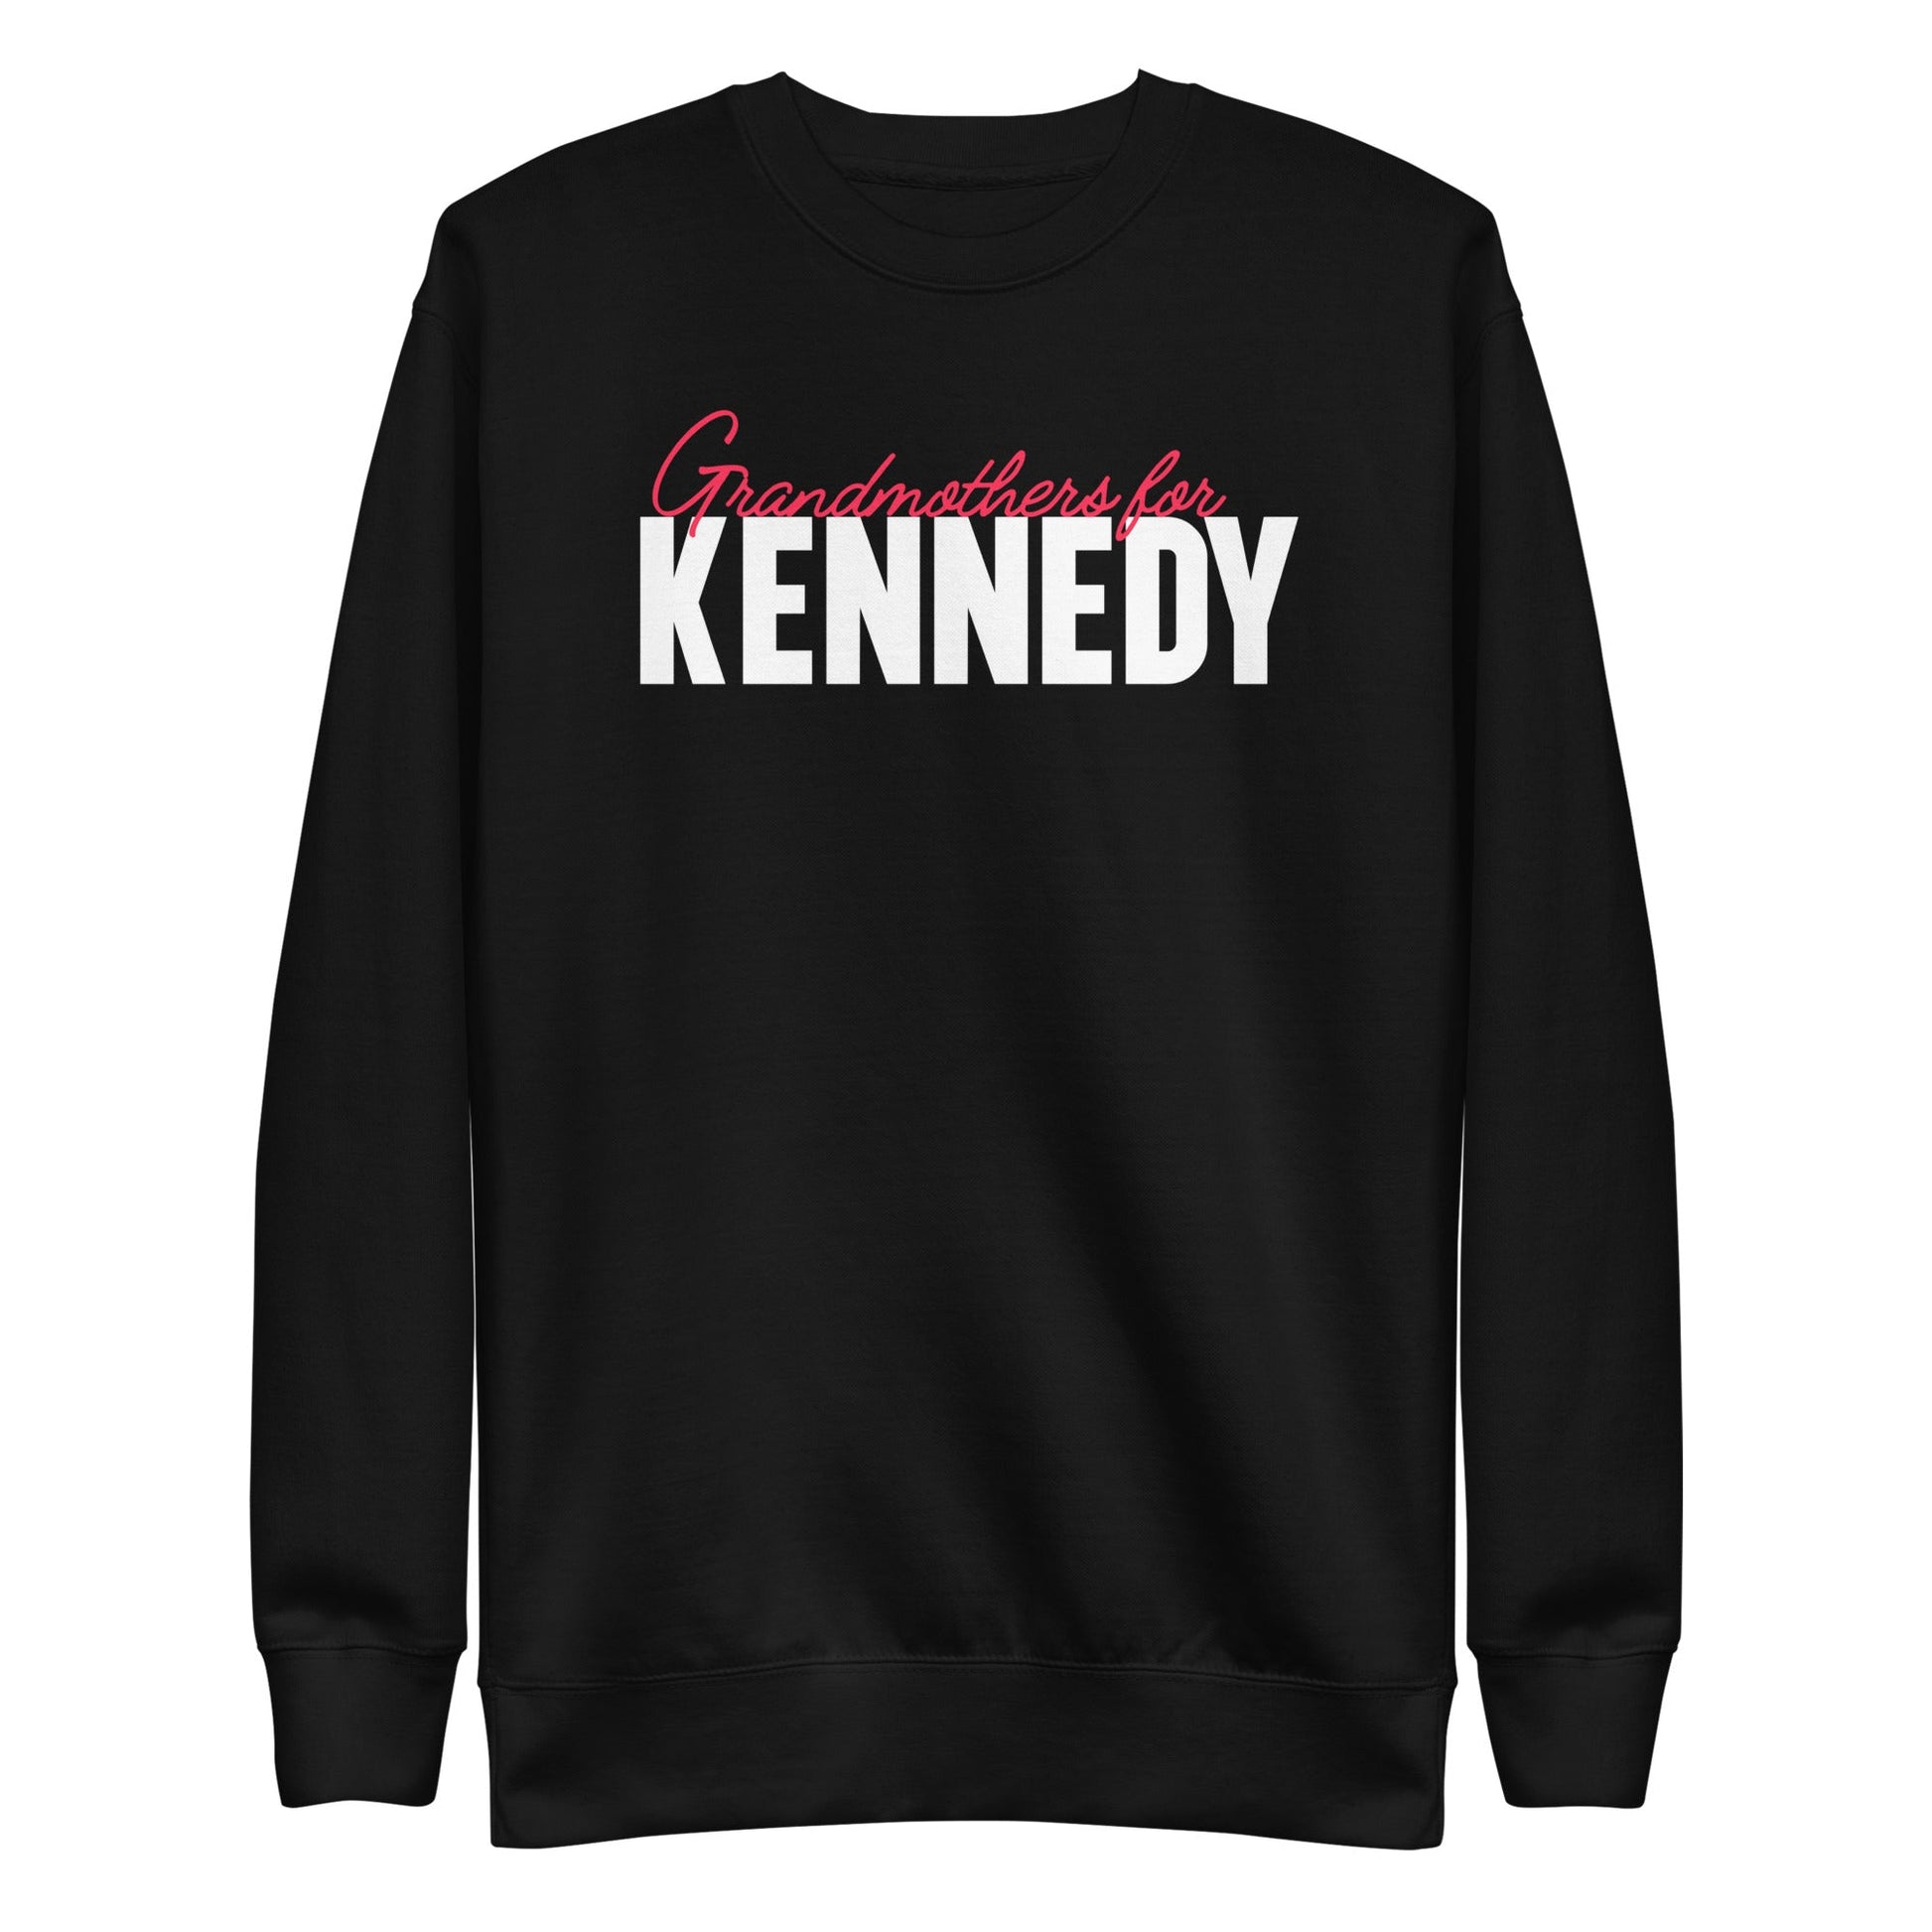 Grandmothers for Kennedy Unisex Premium Sweatshirt - TEAM KENNEDY. All rights reserved